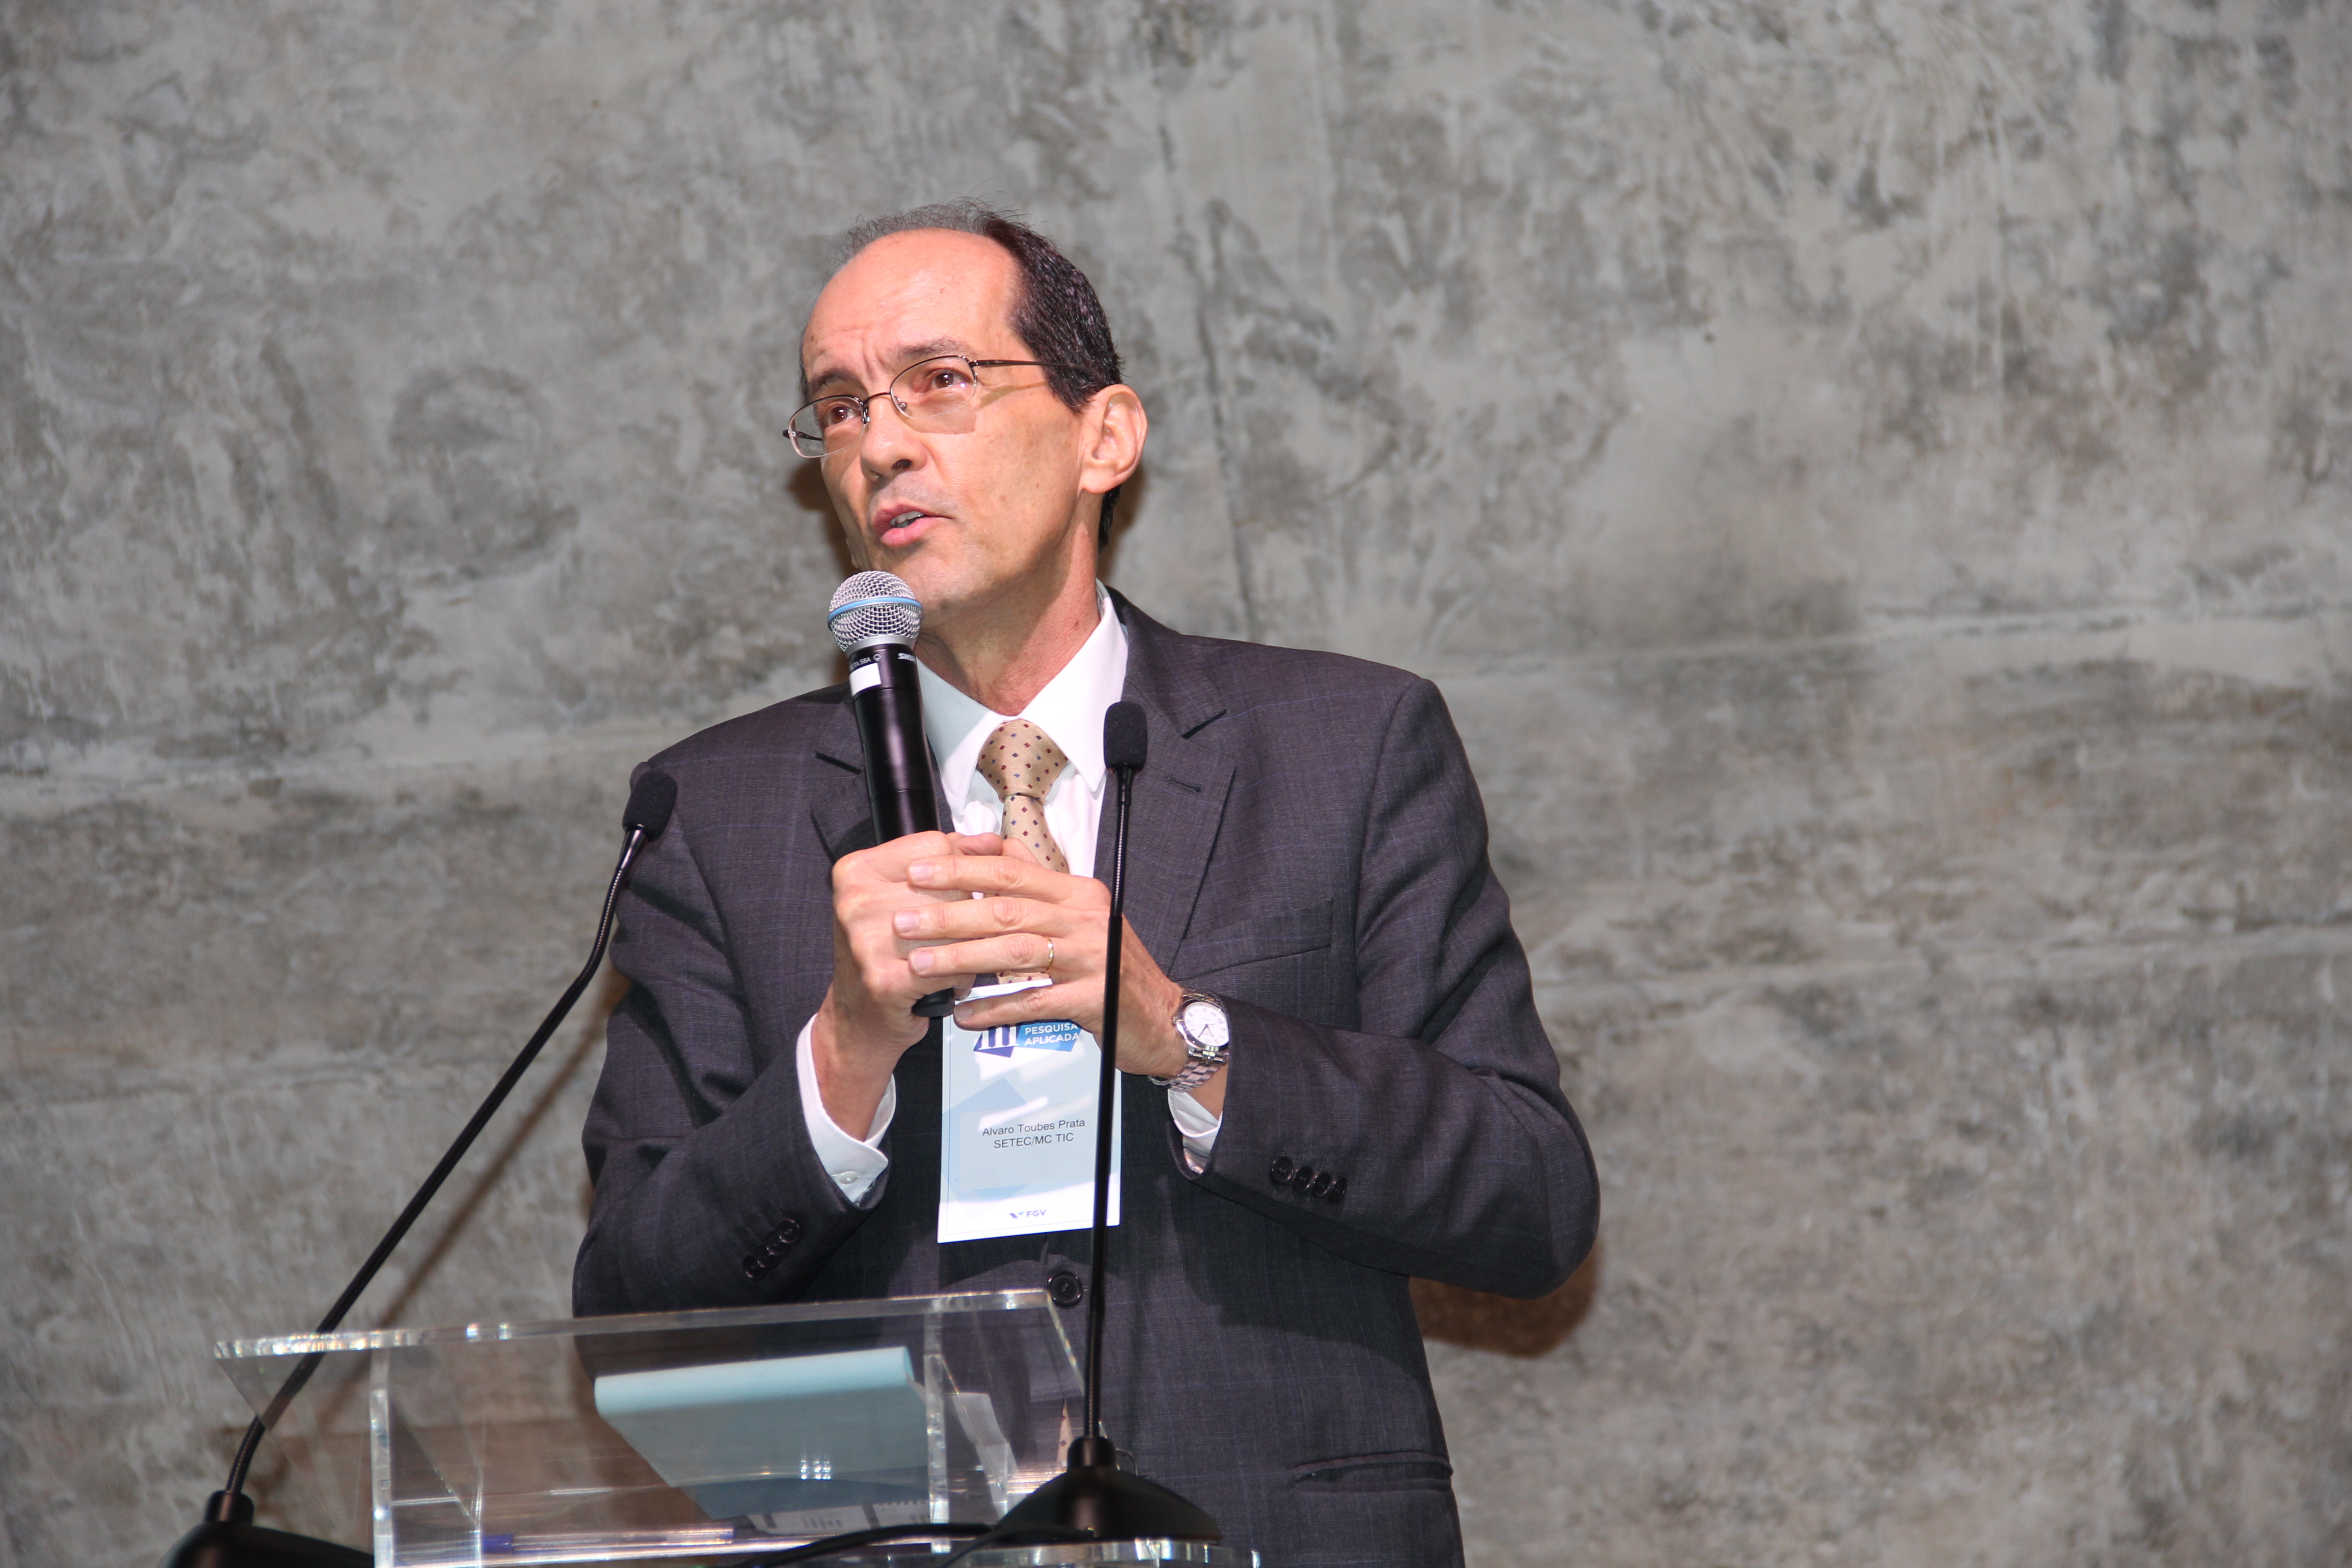 Álvaro Prata, secretary of technological development and innovation in the Ministry of Science, took part in the colloquium